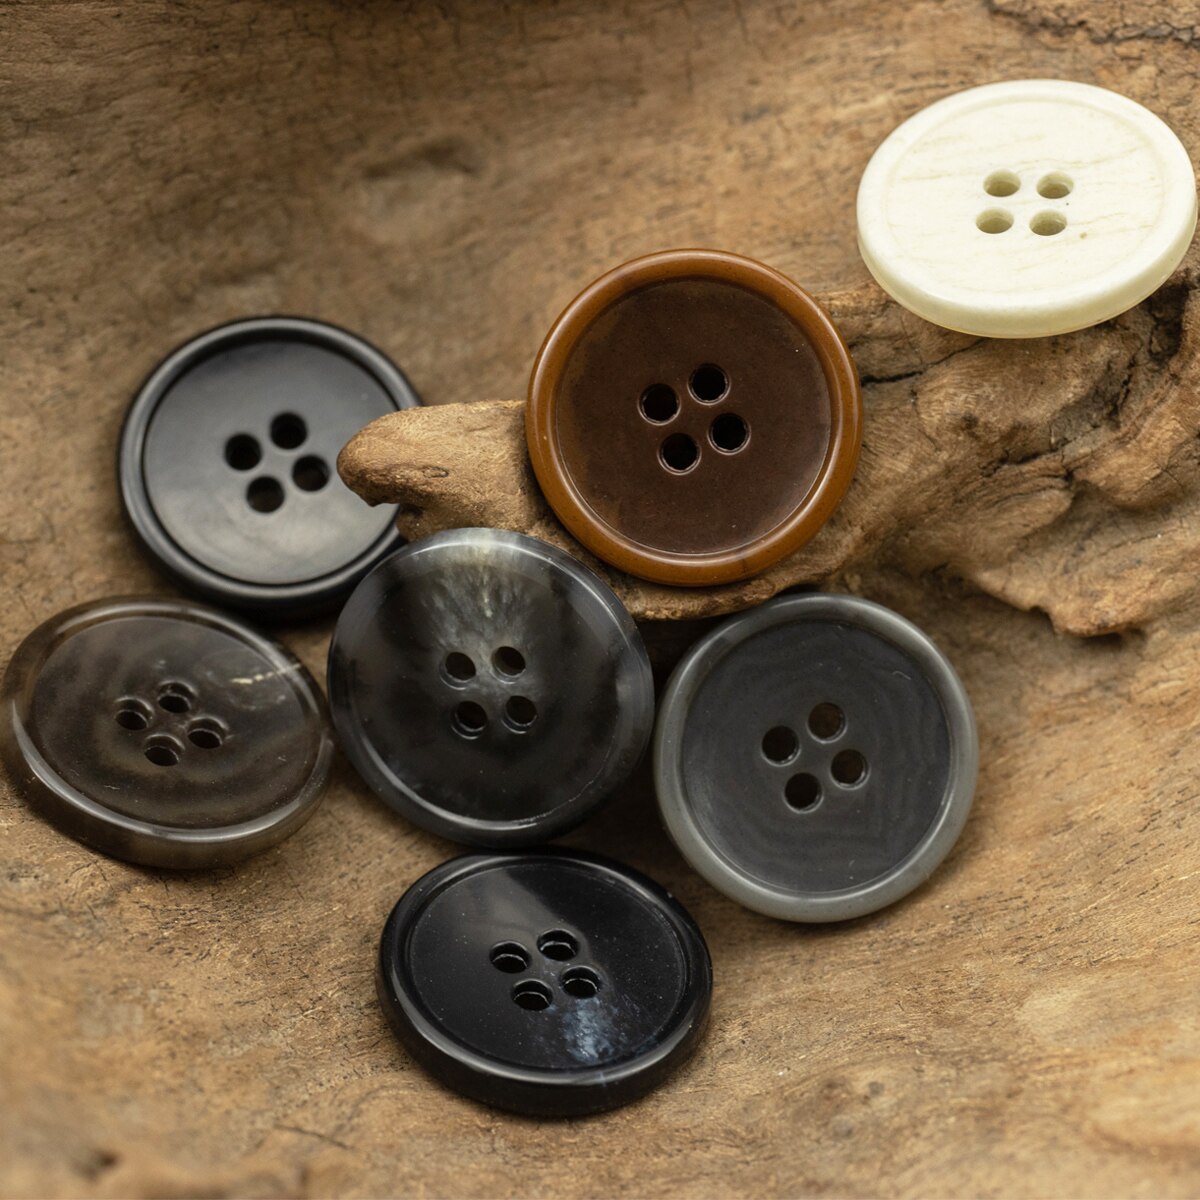 High Quality 4 Hole Round Rim Urea Buttons for Suit Sewing Accessories for Jacket Blazer